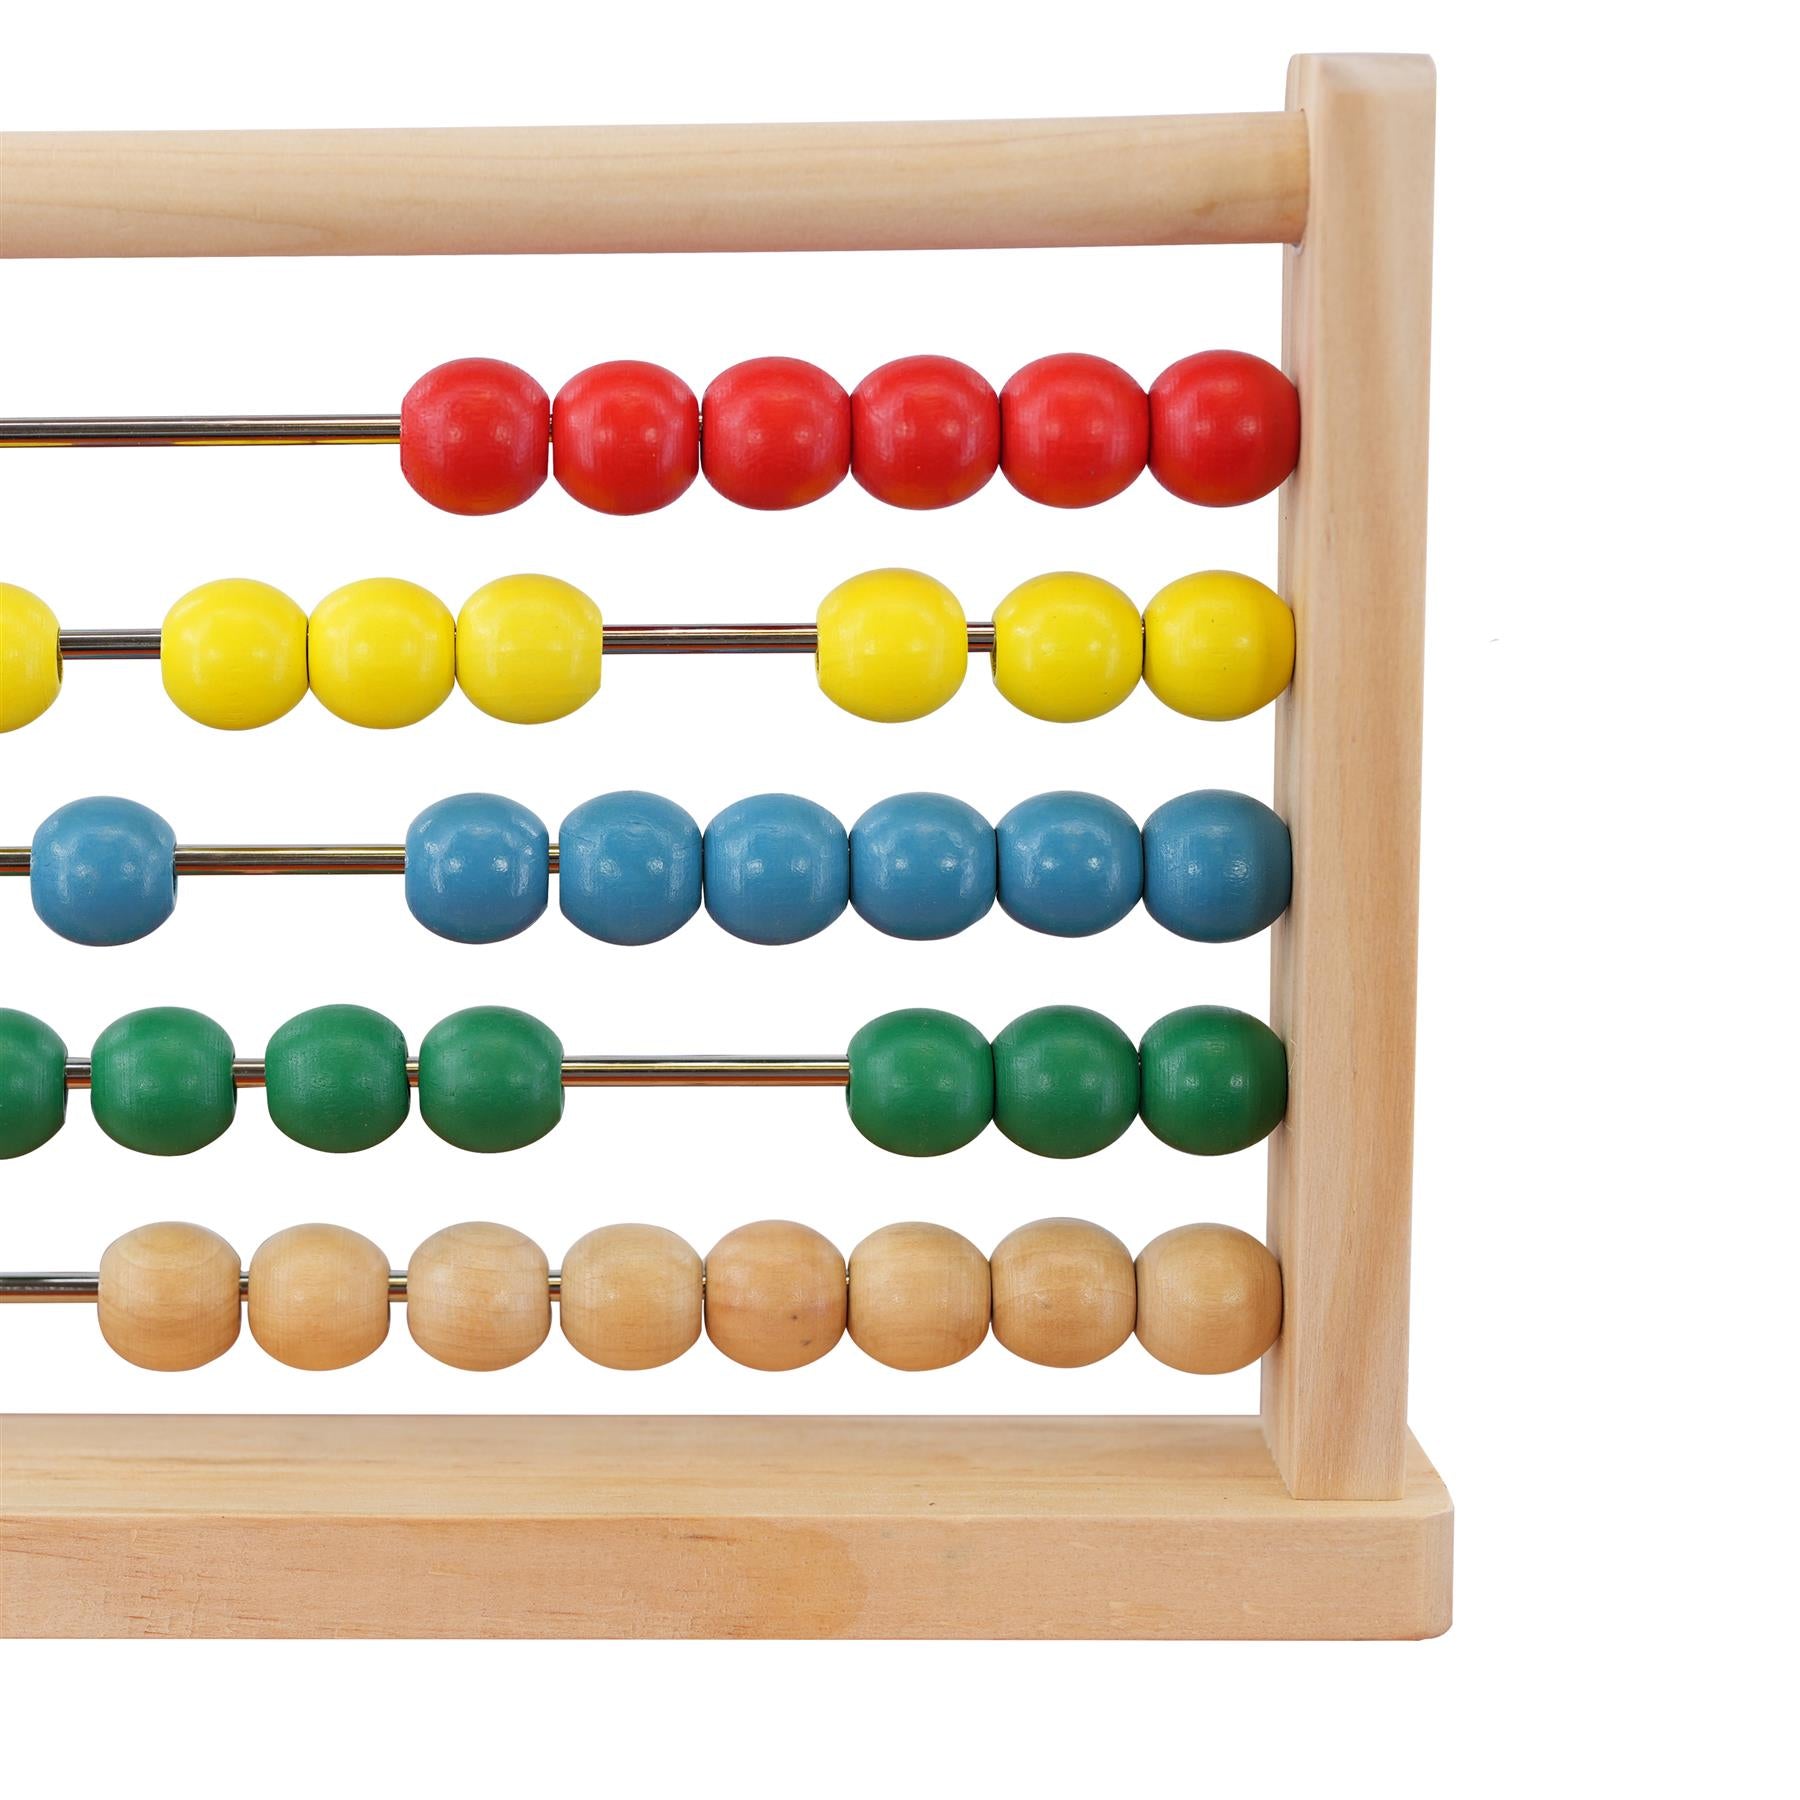 Large Sturdy Wooden Abacus by The Magic Toy Shop - The Magic Toy Shop